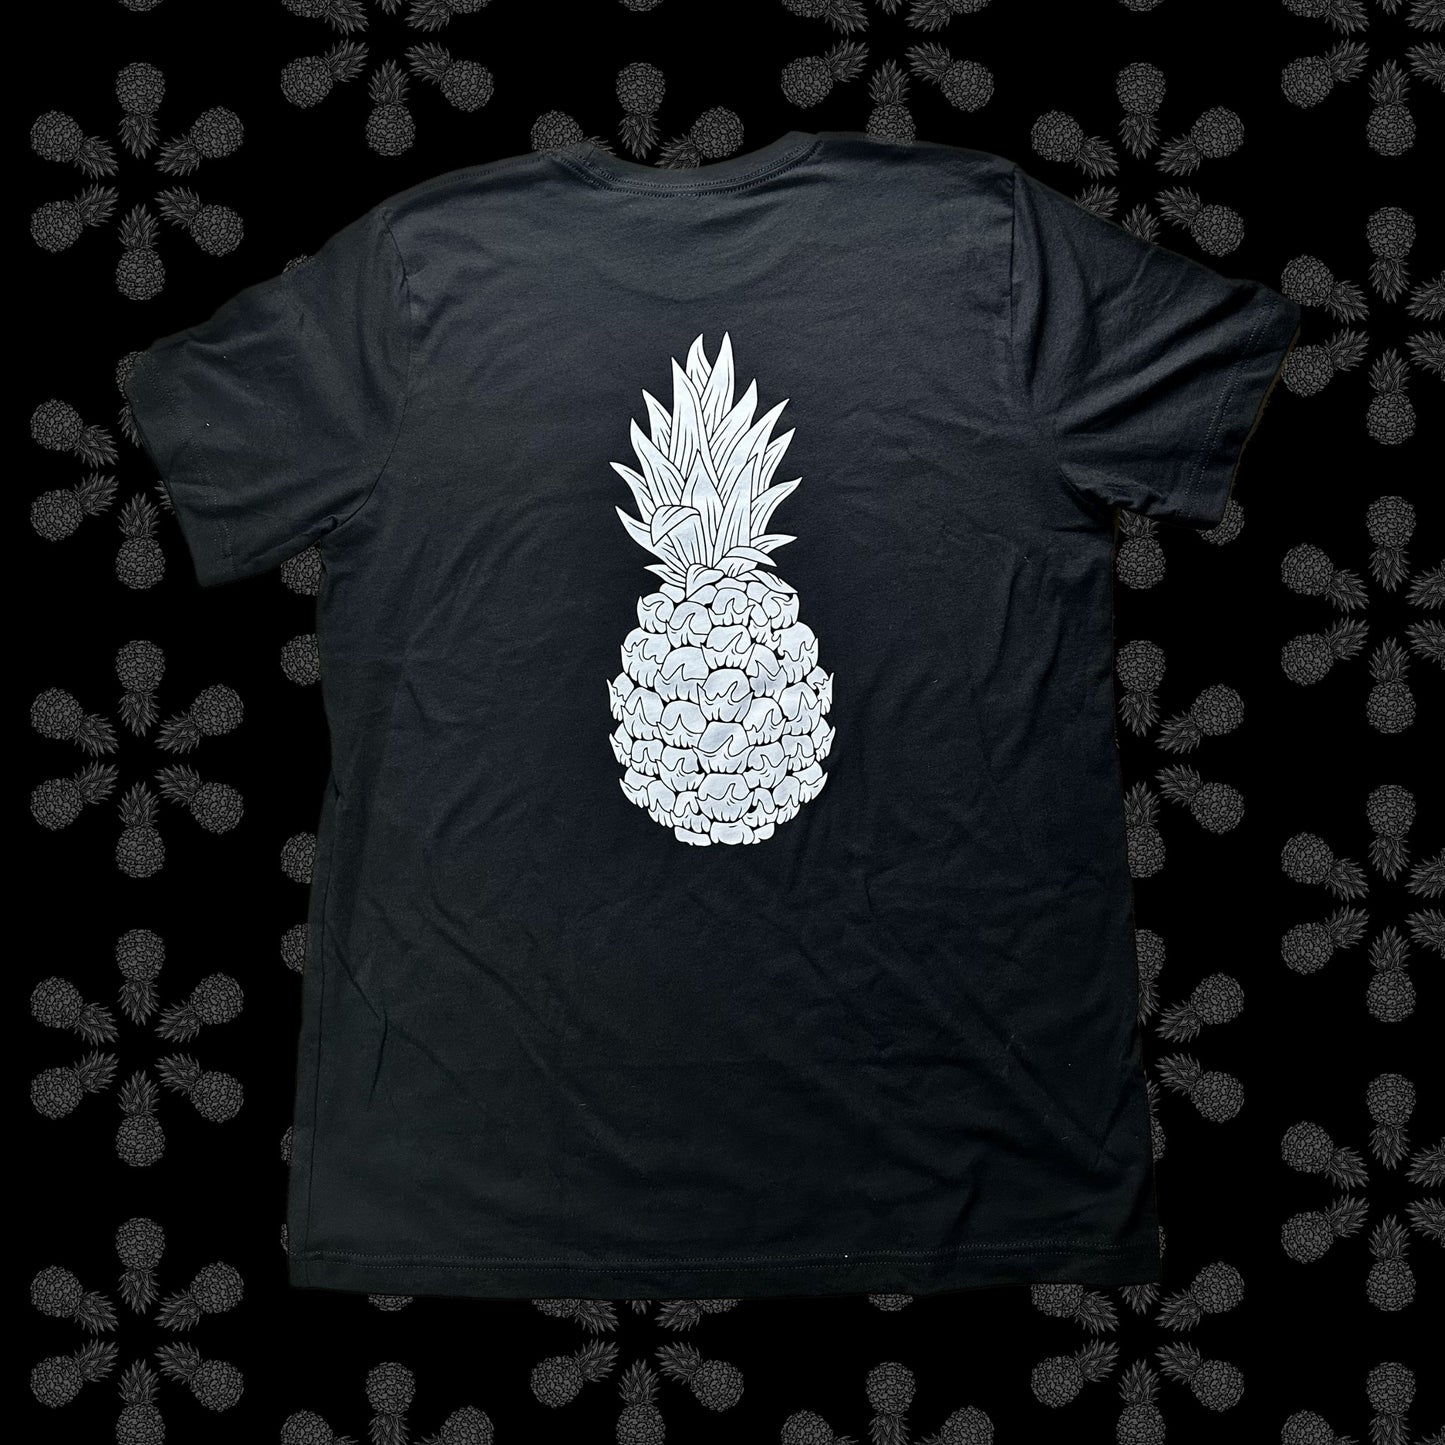 A must-have for any PNW clothing store, our PNW tee shirt features a unique Pacific Northwest design. Show off your Pacific Northwest pride with this trendy PNW sports apparel, perfect for both men and women. Made by a top PNW clothing company, this shirt is a great addition to your PNW wardrobe.